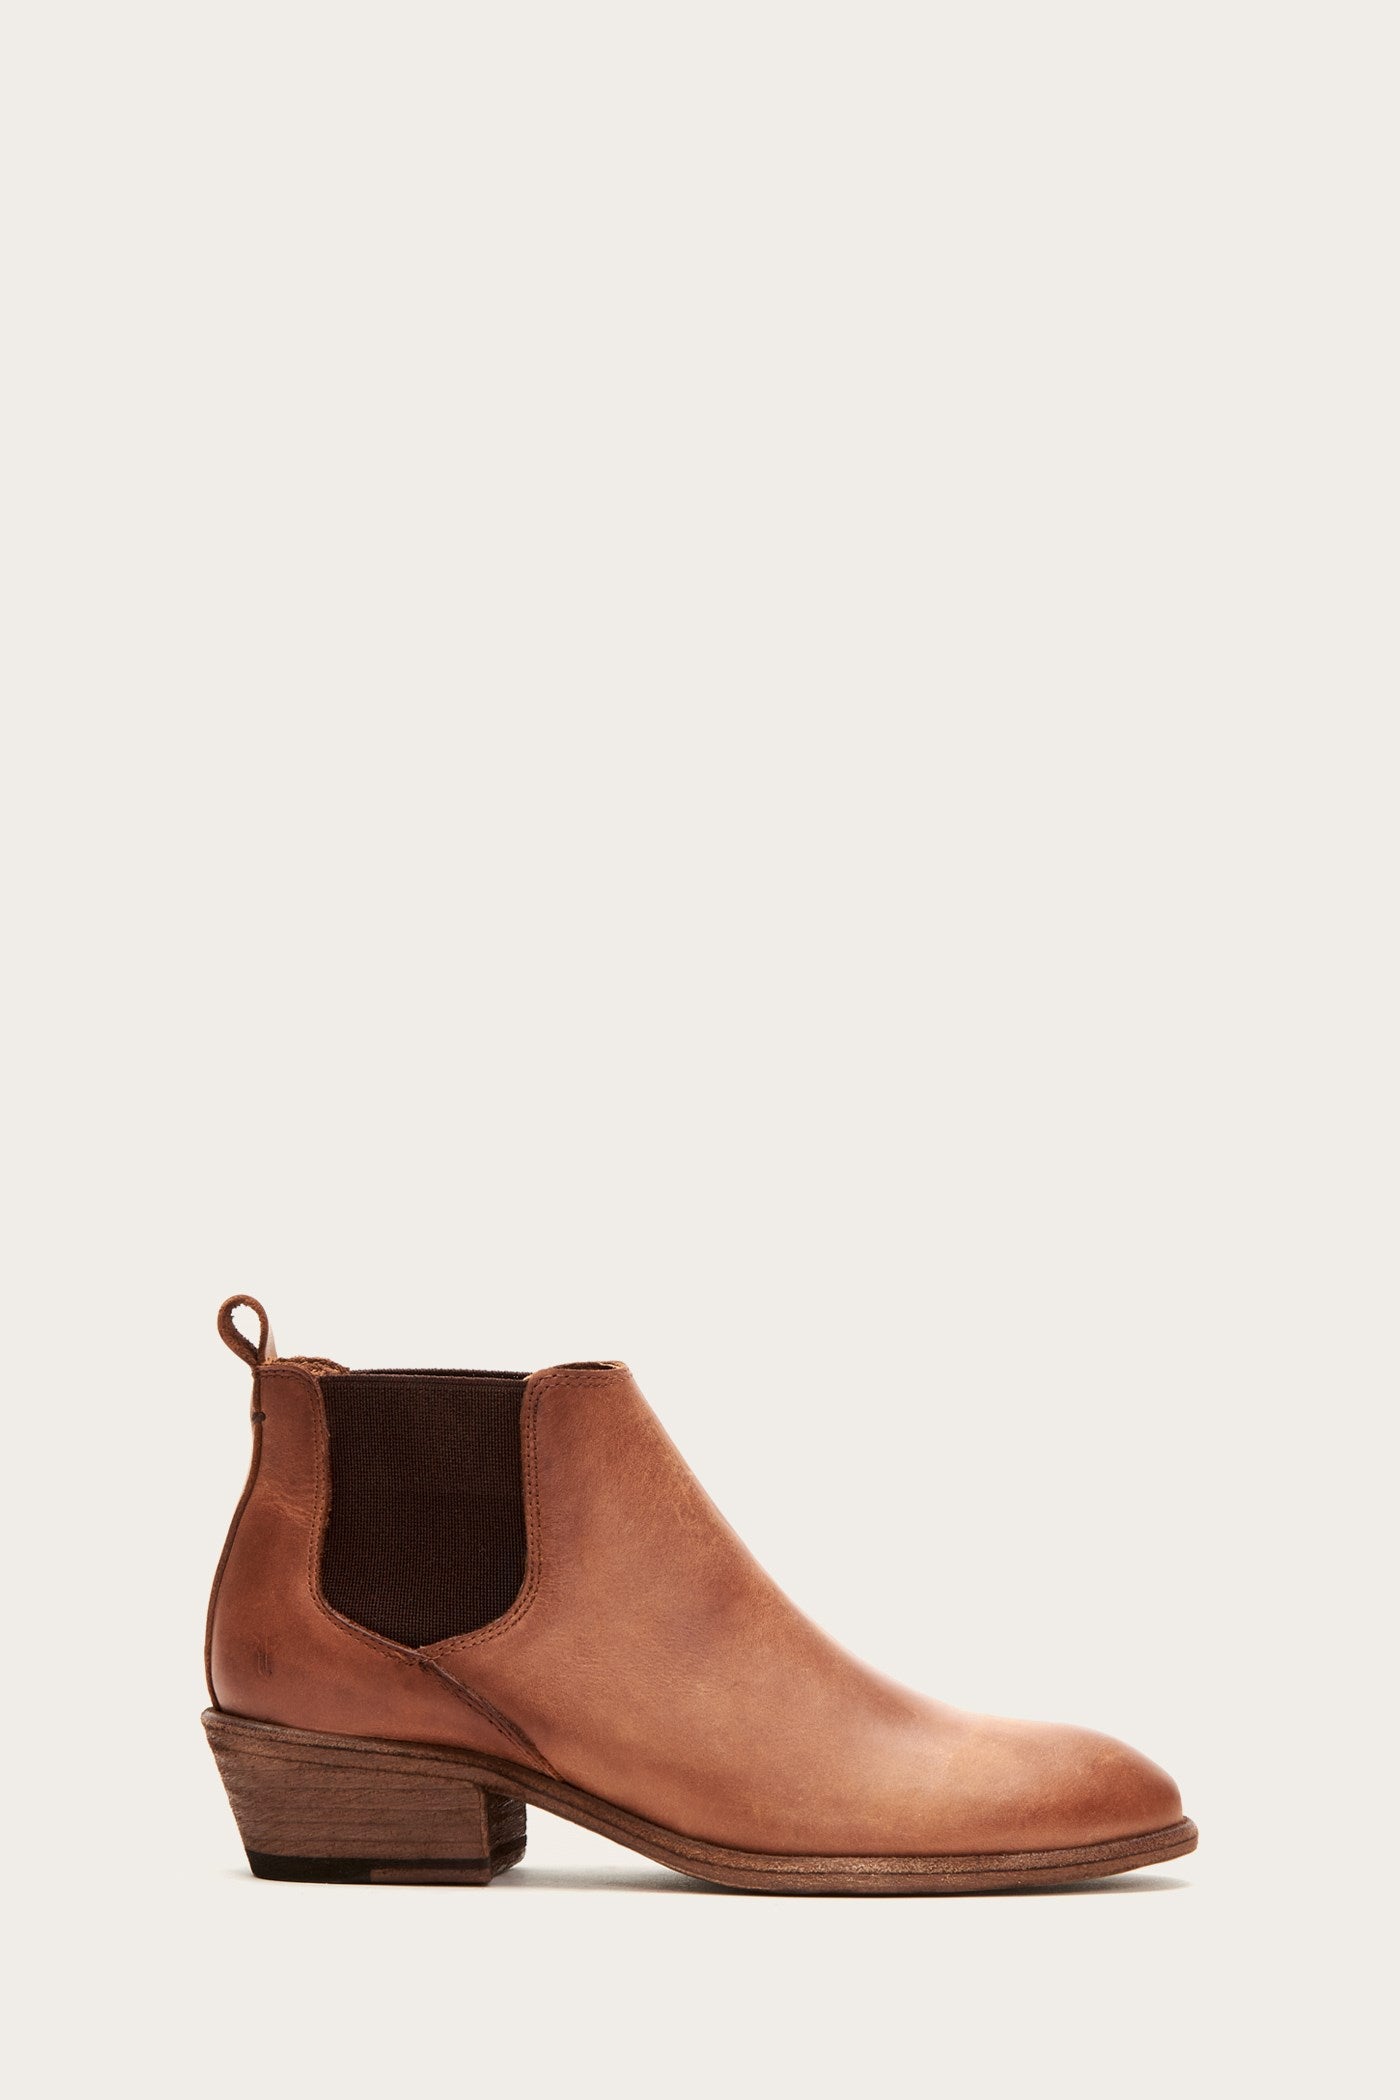 carson frye boots